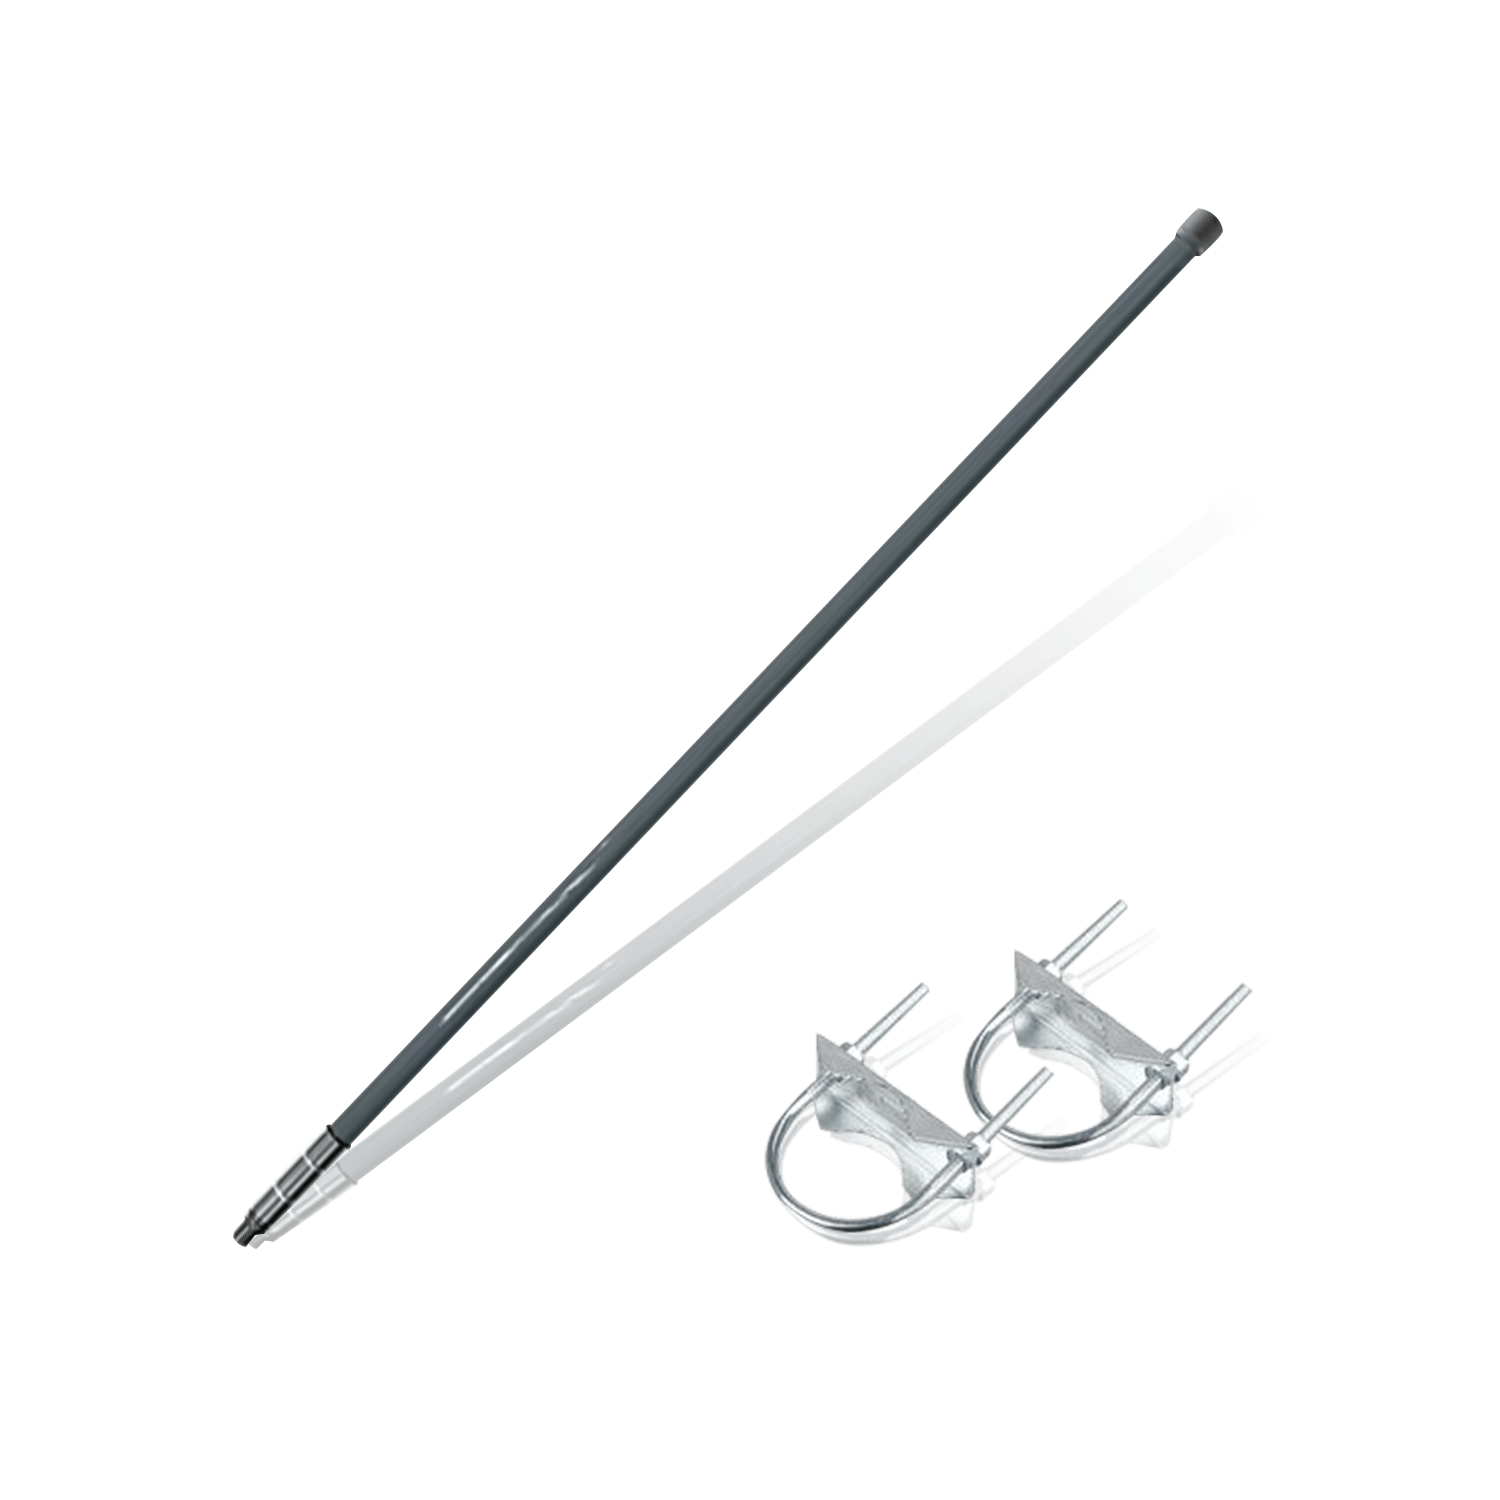 Rokland LoneWolf 12 dBi Outdoor Antenna (915 MHz) - Mapping Network